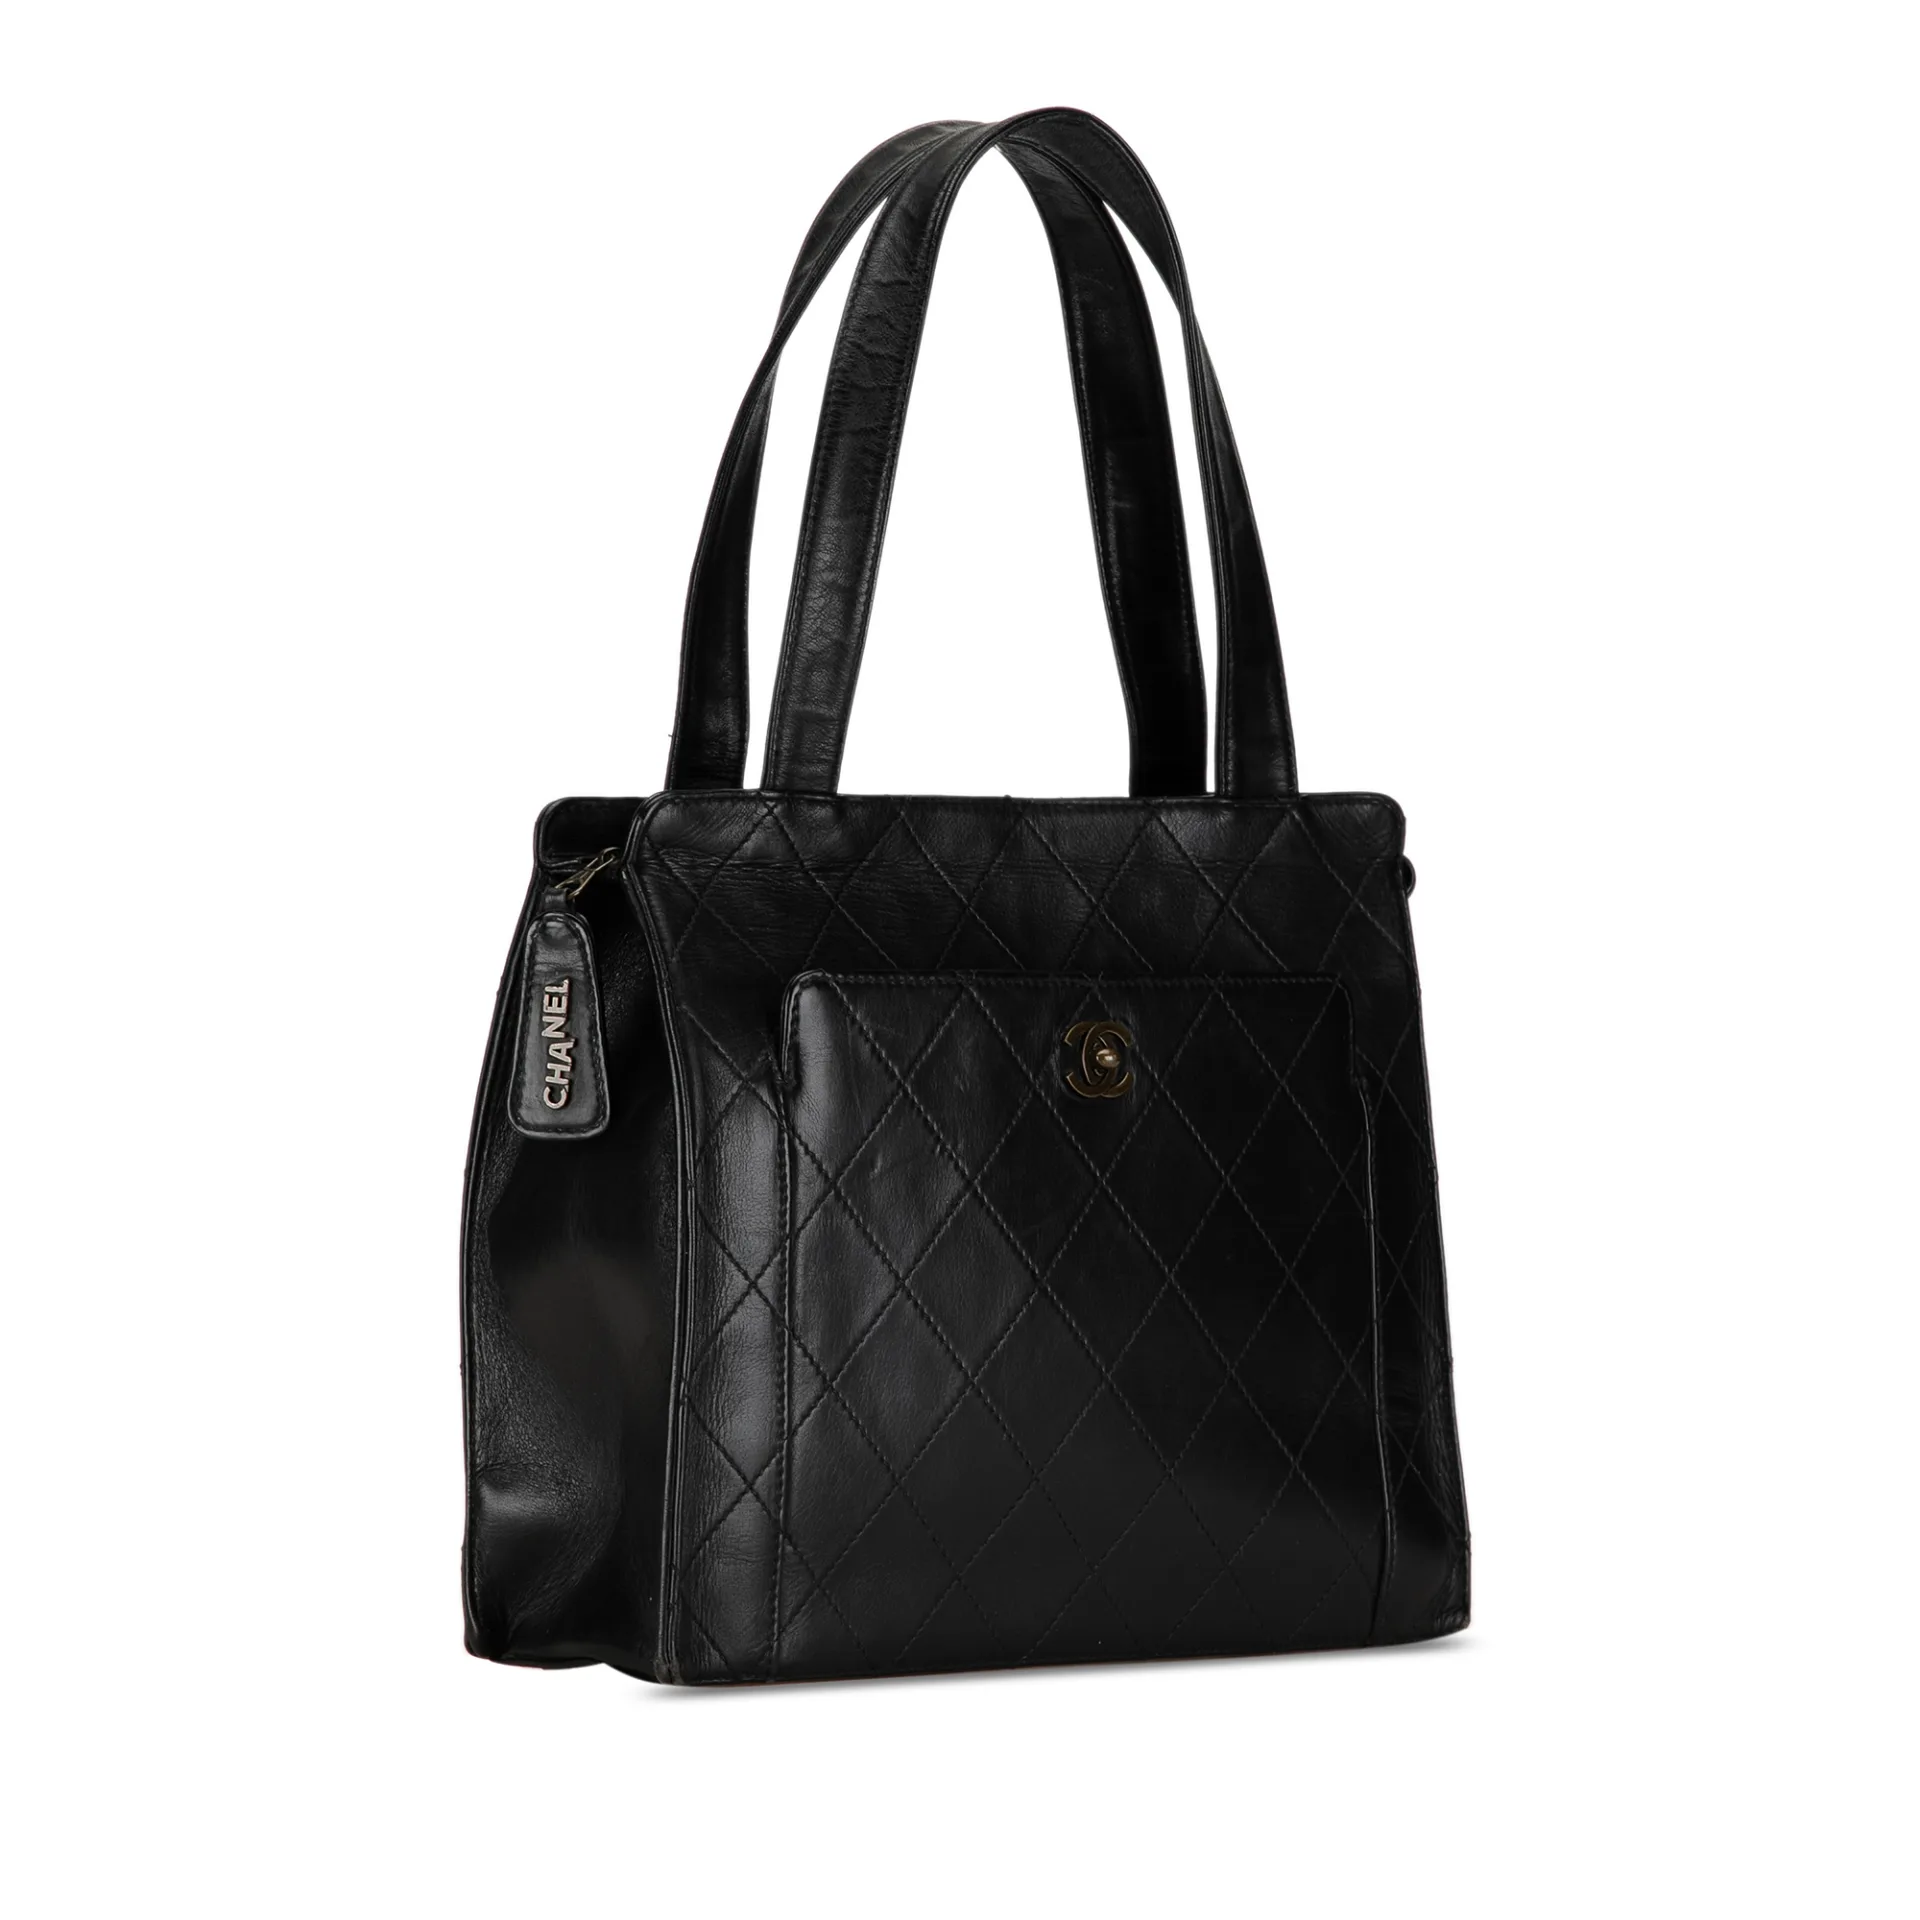 Chanel Cc Quilted Calfskin Tote